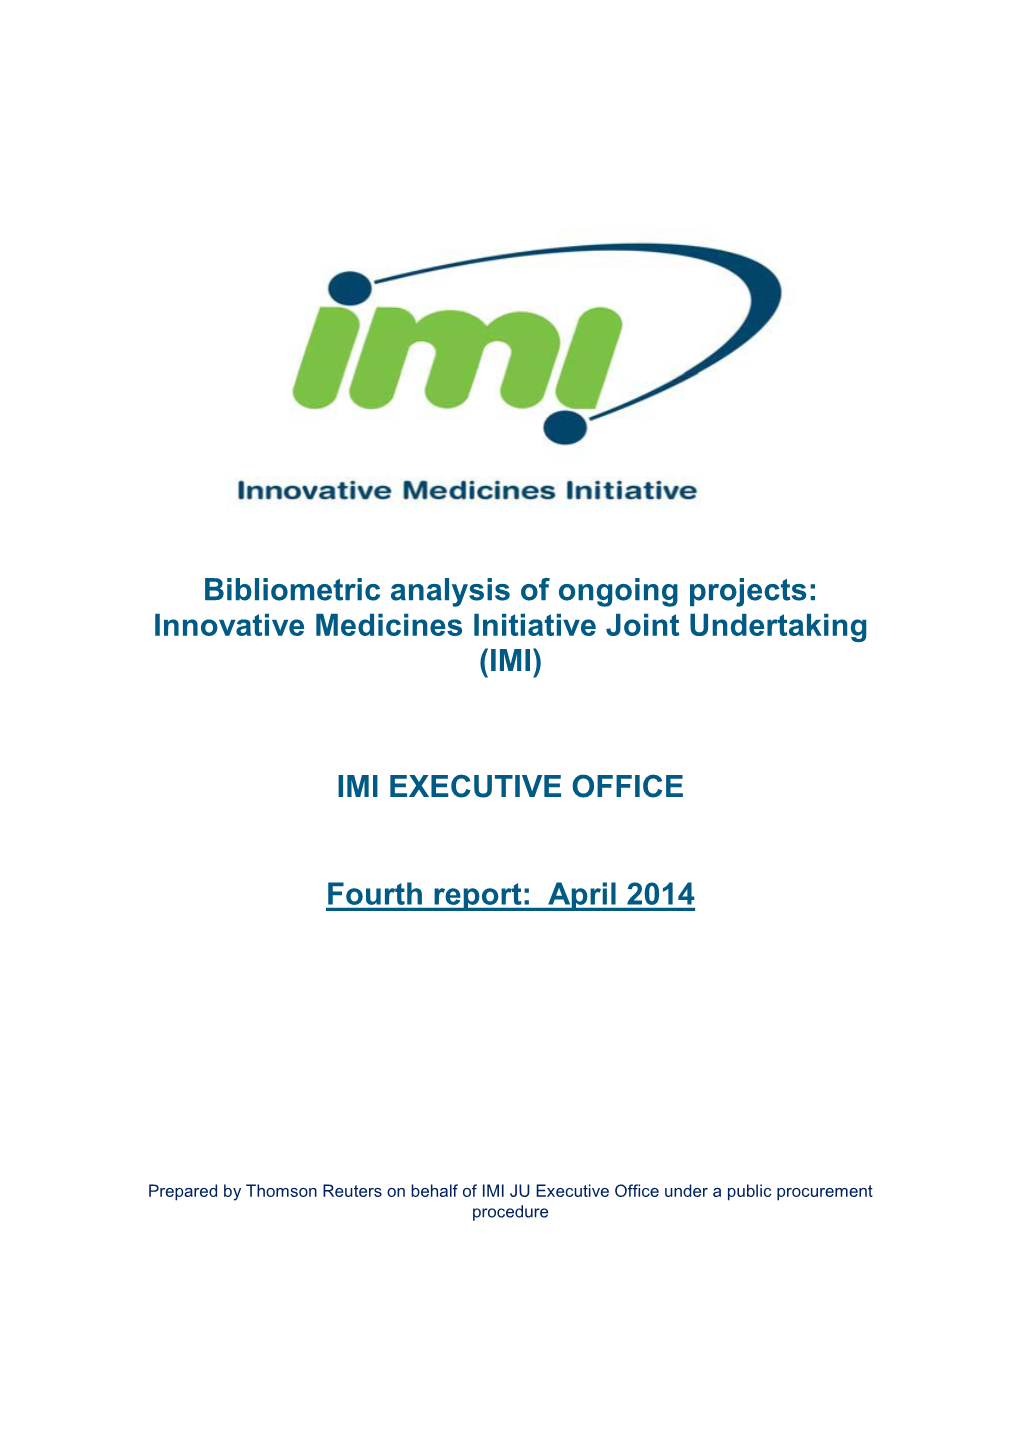 Bibliometric Analysis of Ongoing Projects: Innovative Medicines Initiative Joint Undertaking (IMI)